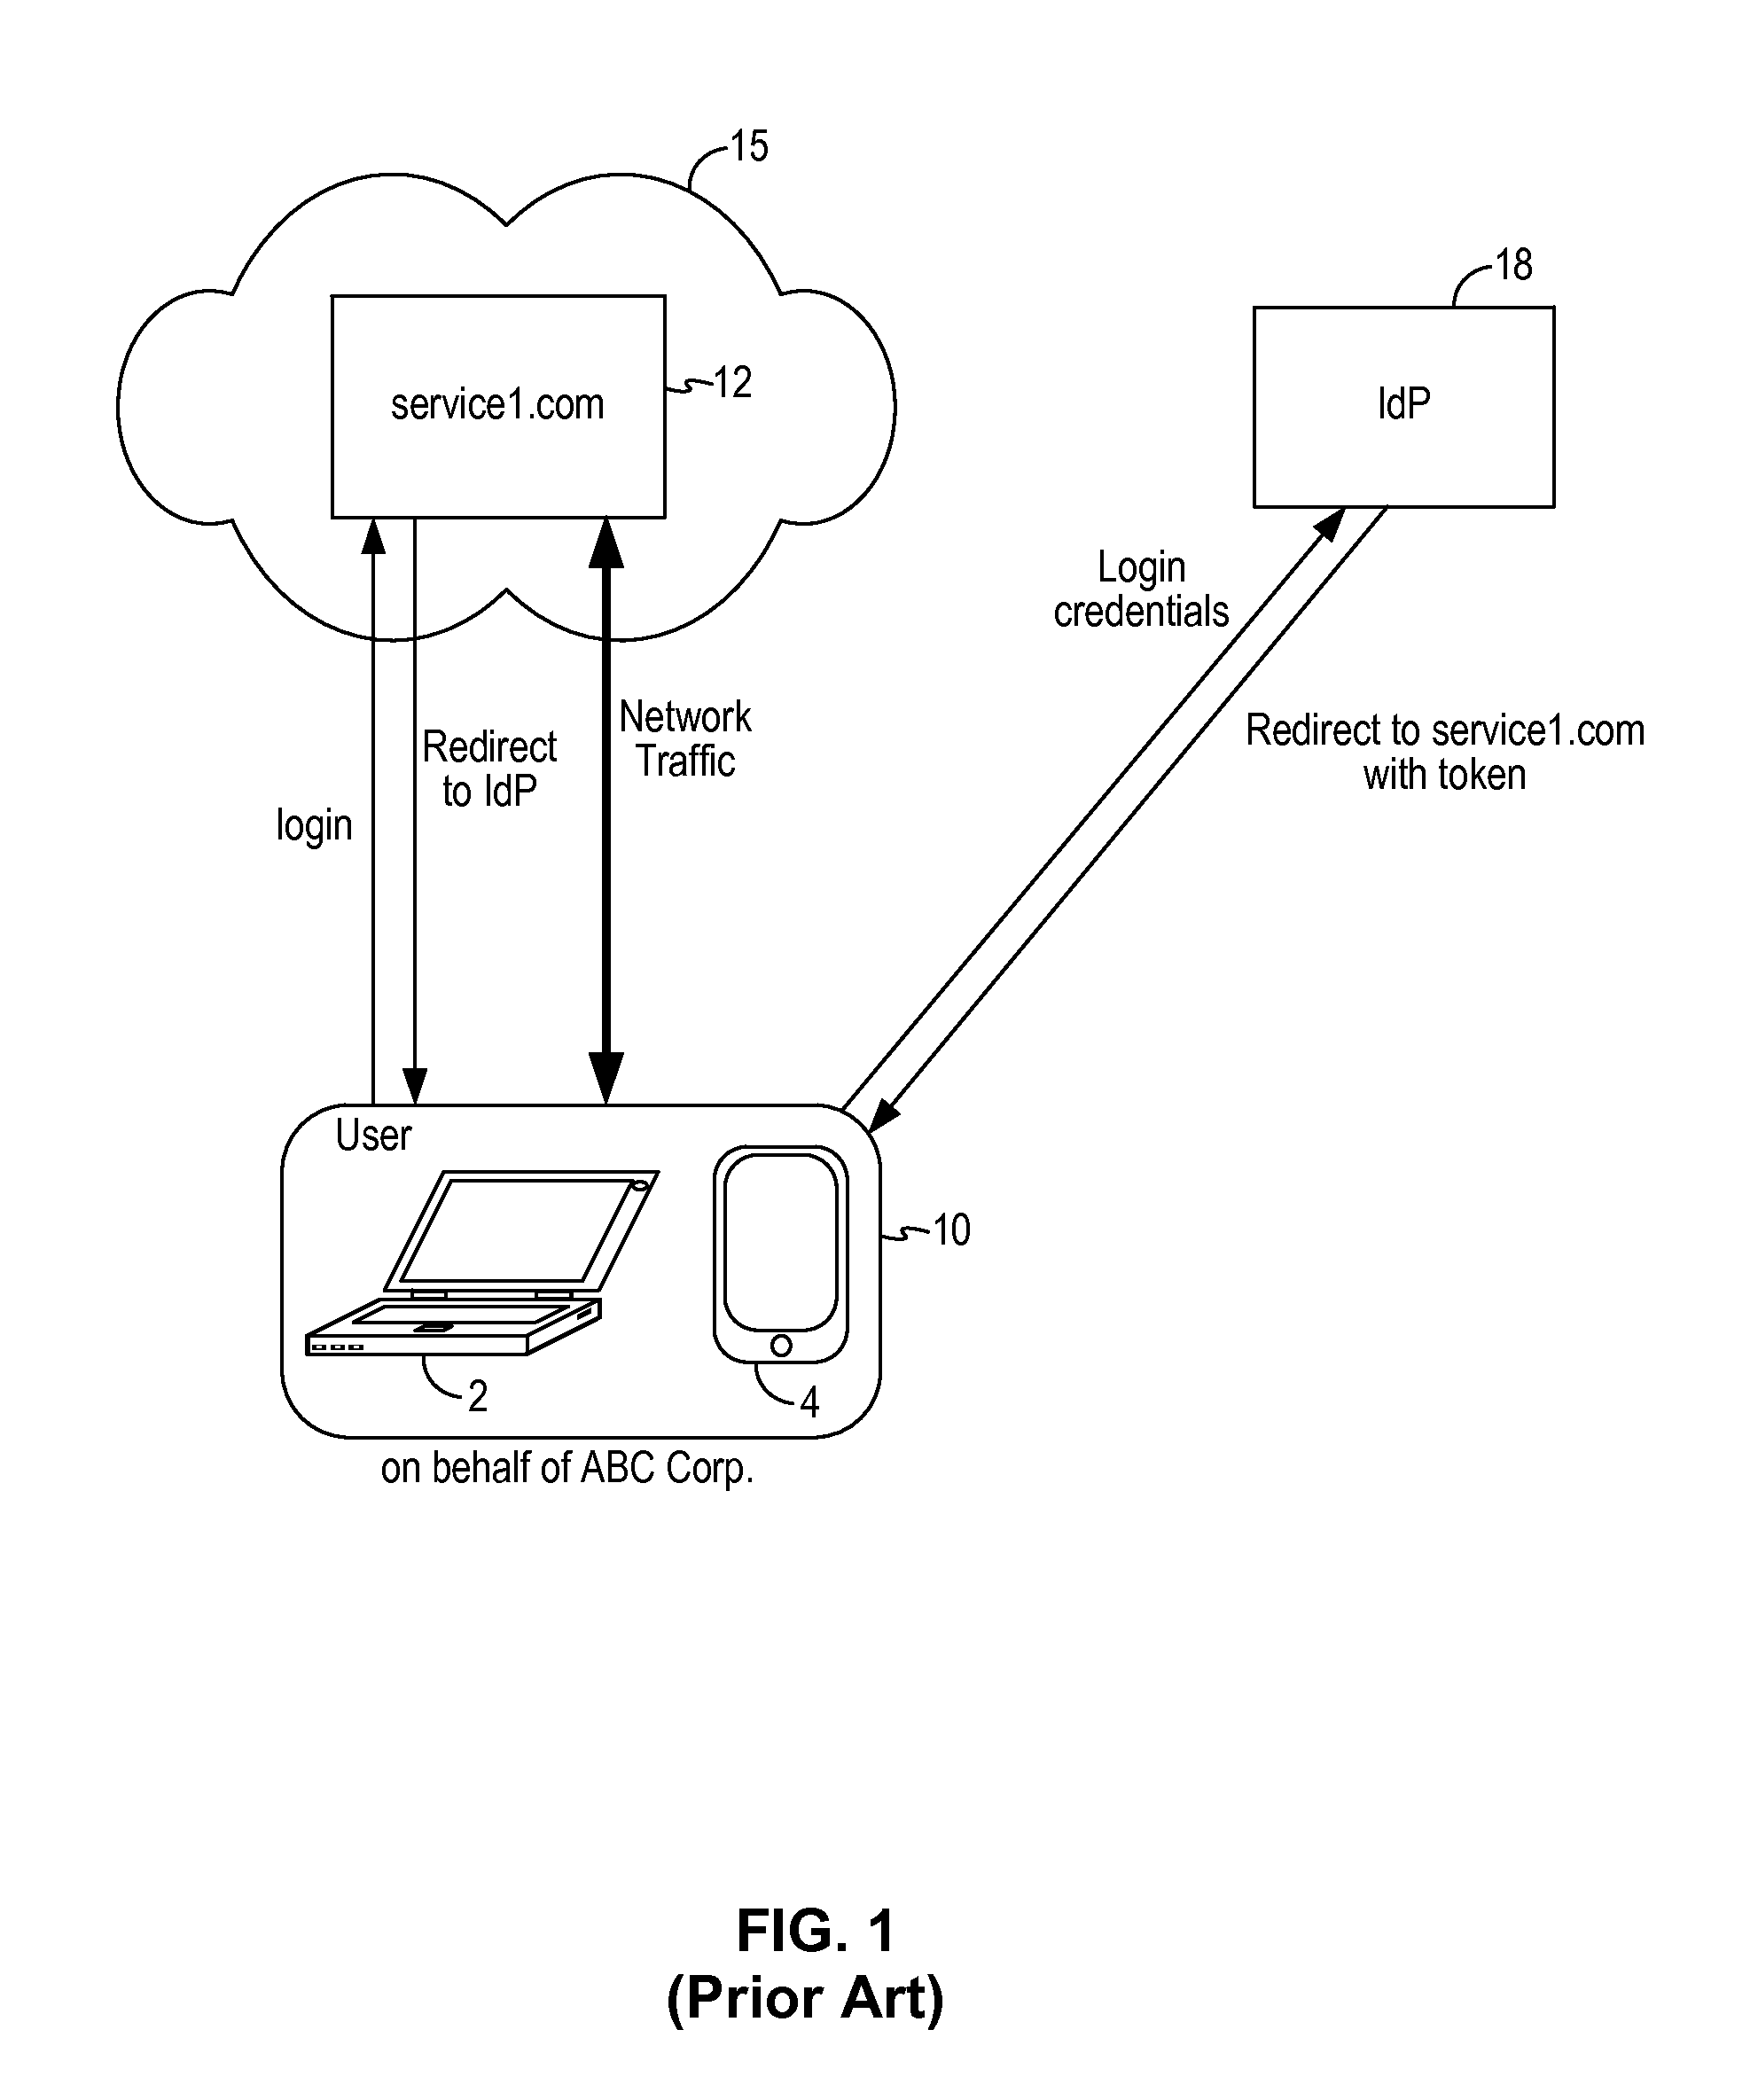 Network traffic monitoring system and method to redirect network traffic through a network intermediary